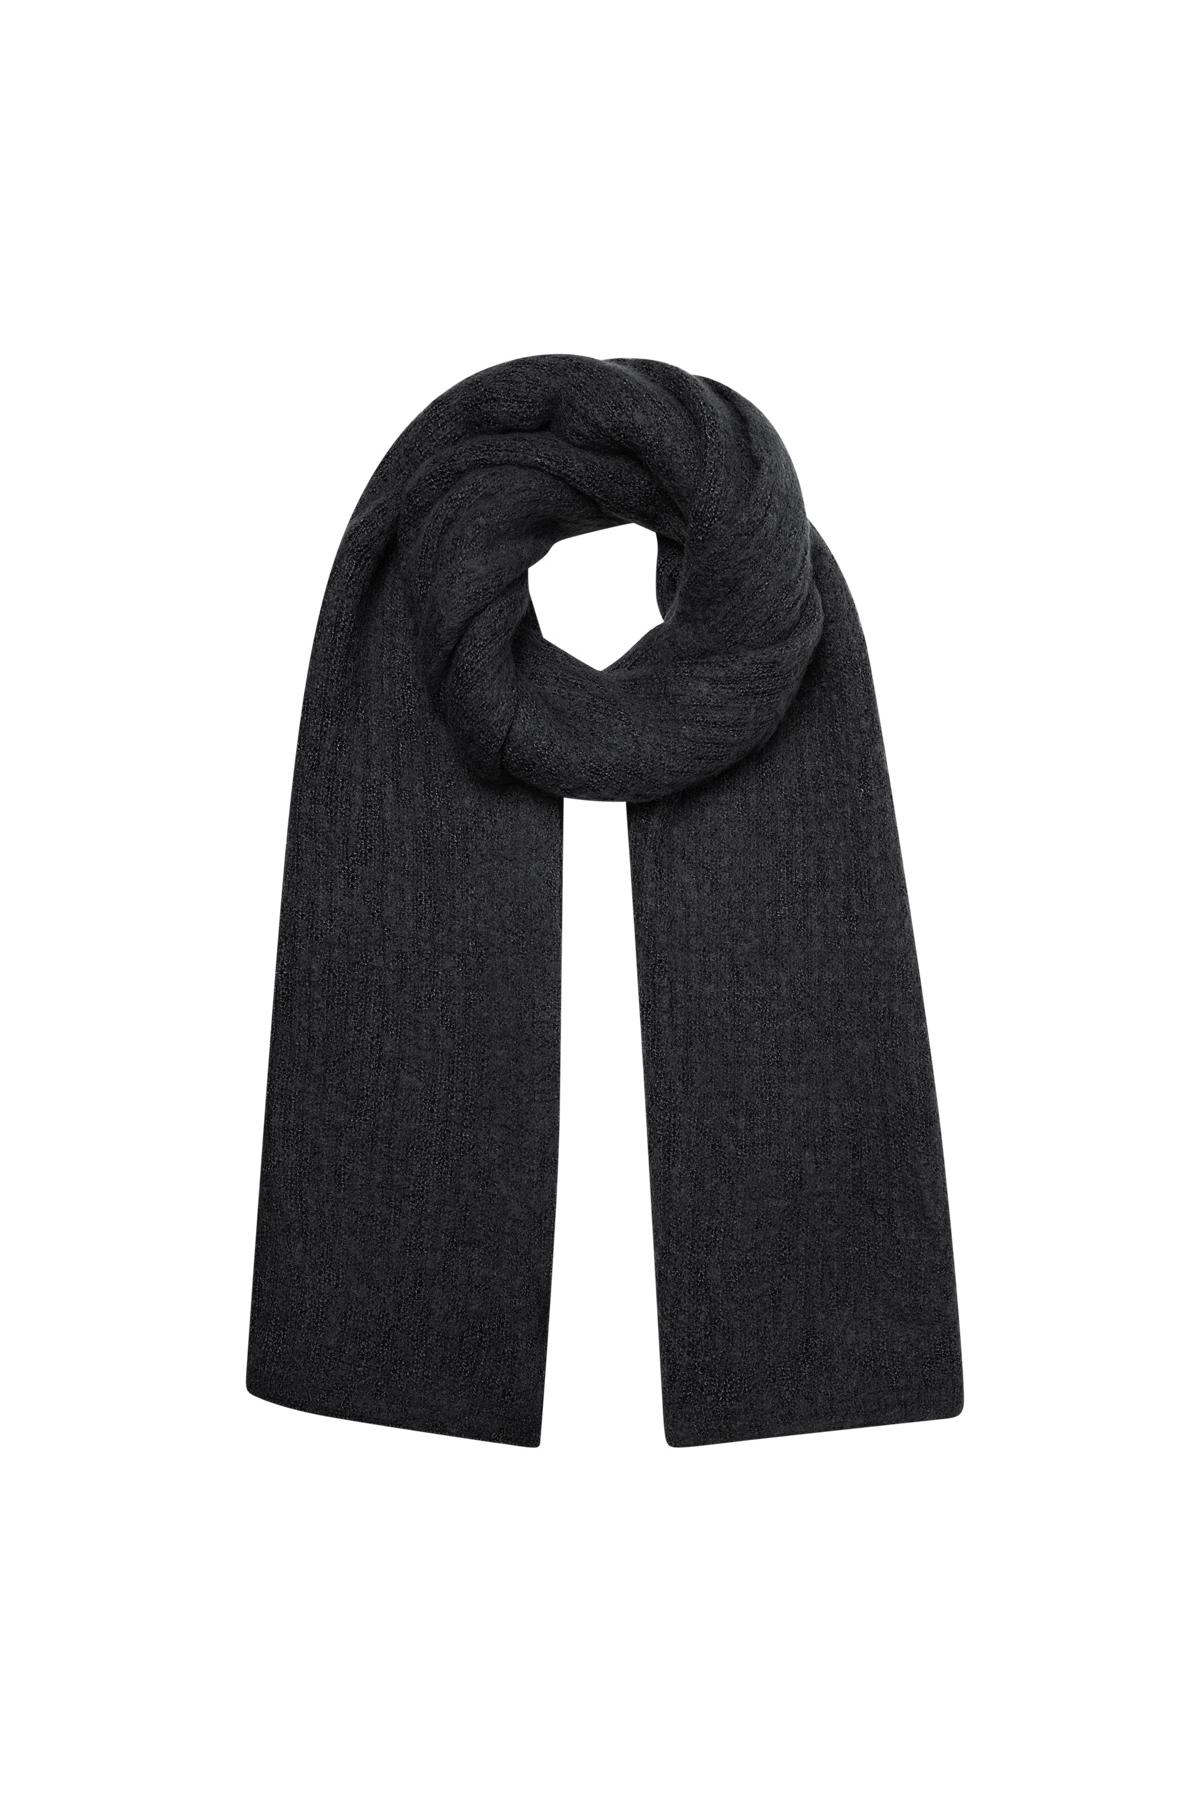 Scarf knitted plain - black